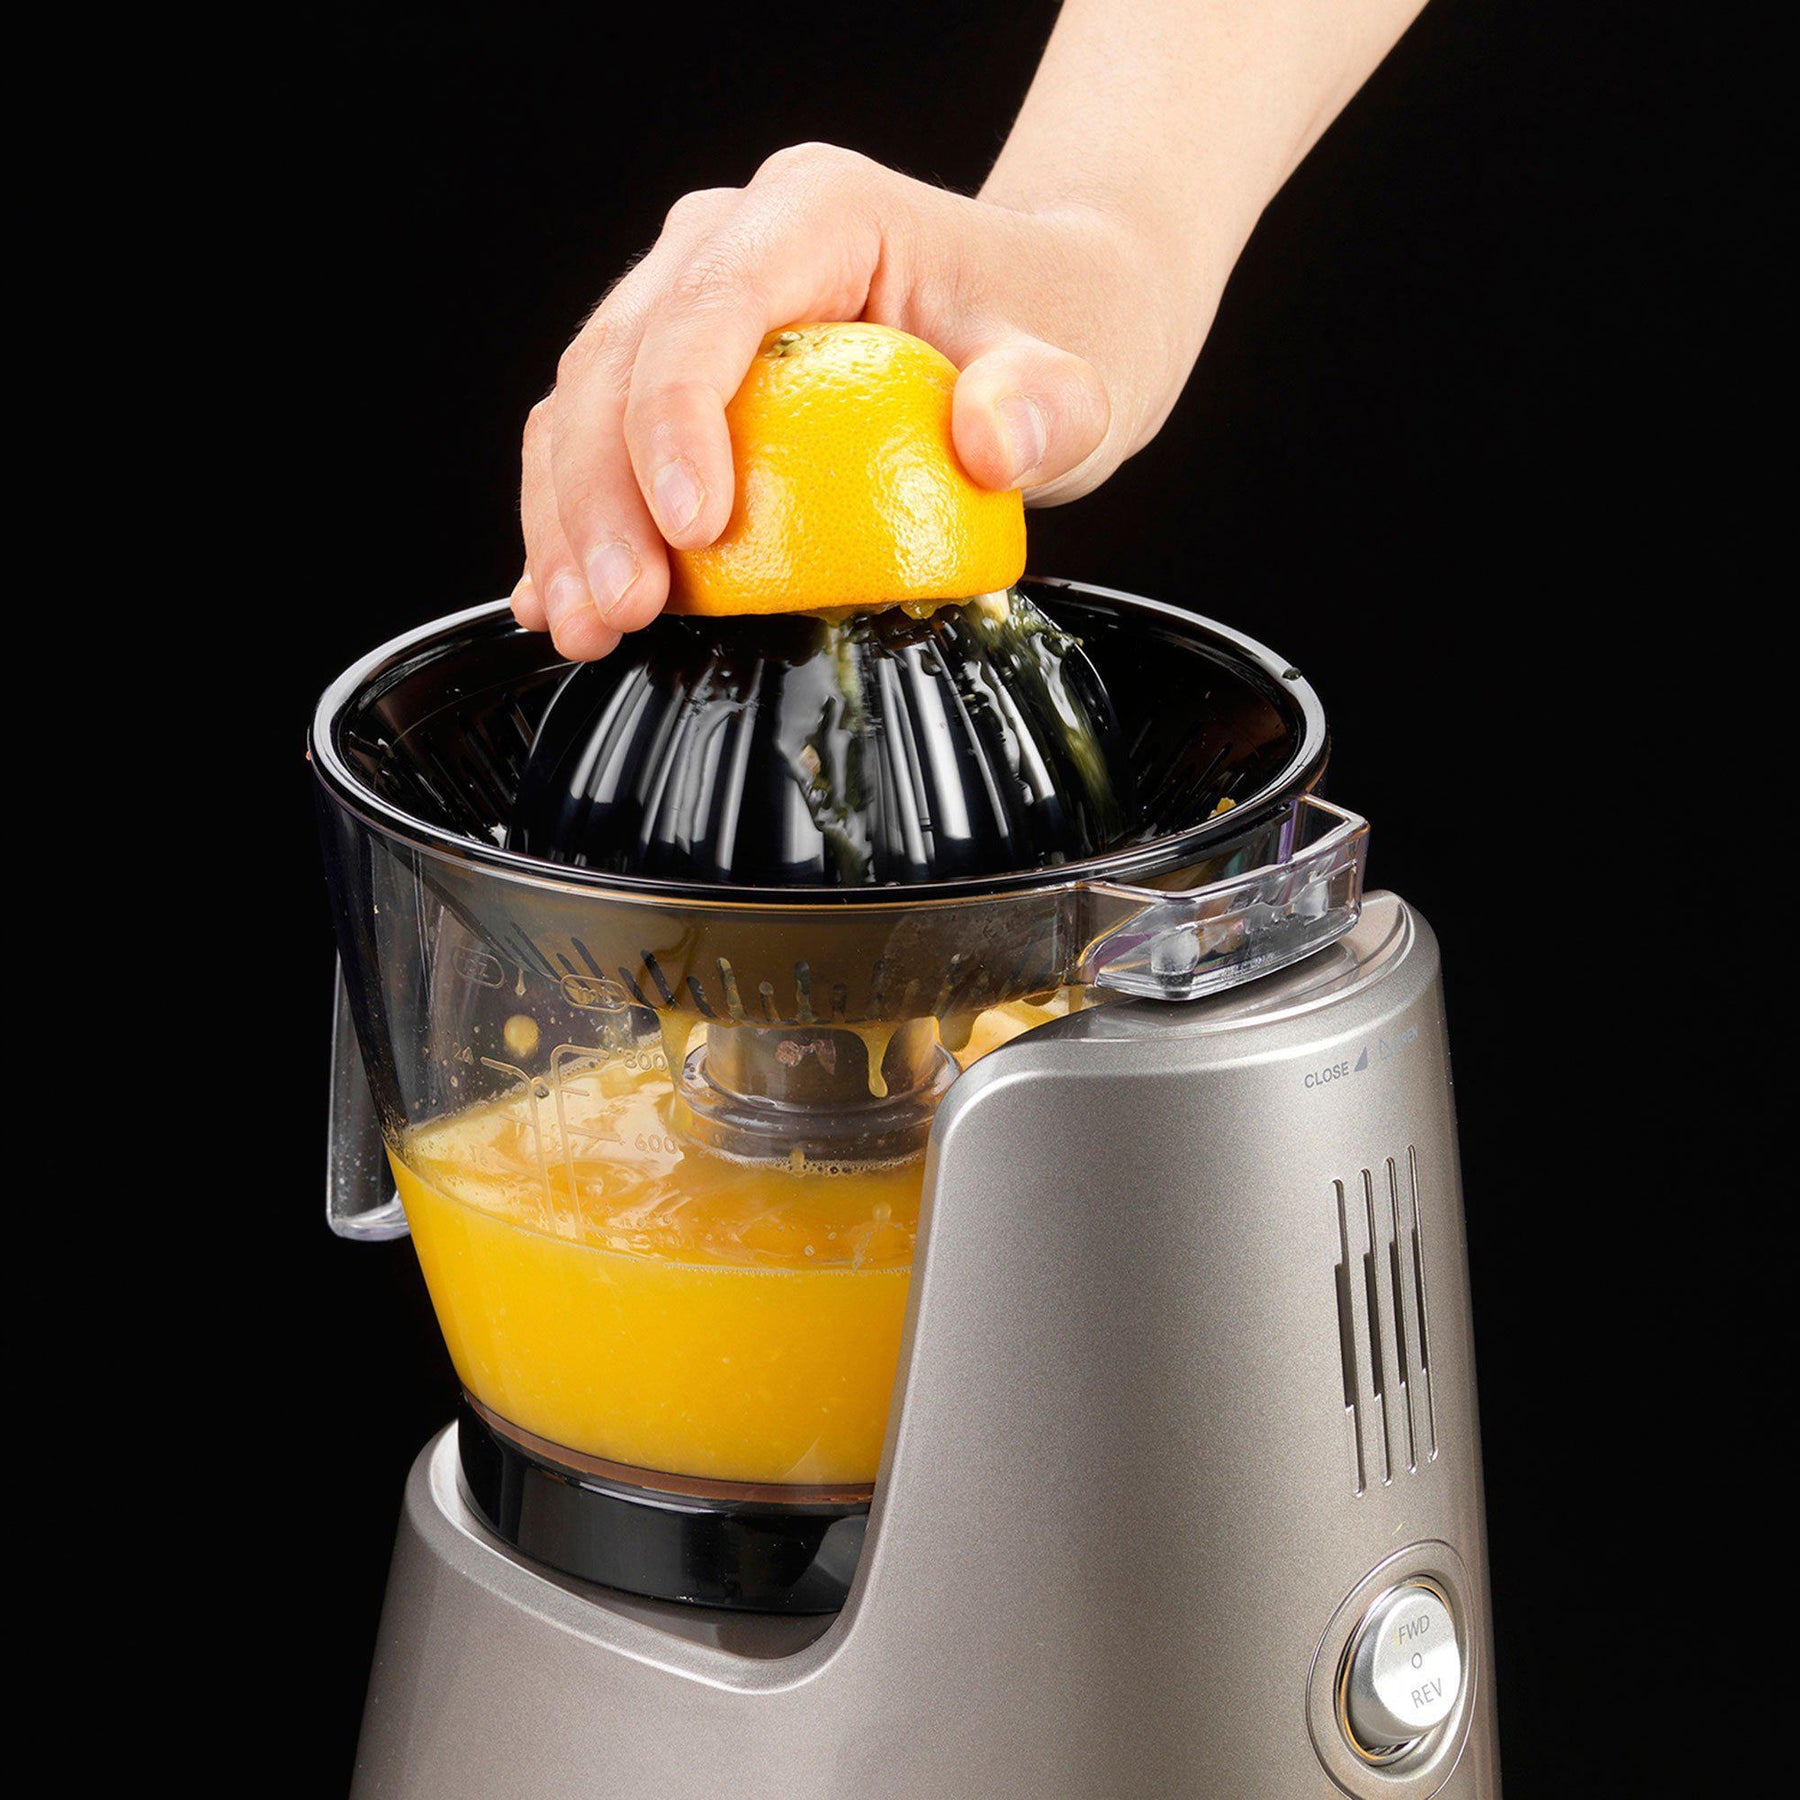 2 Ways You Can Make Orange Juice with the Kuvings REVO830 